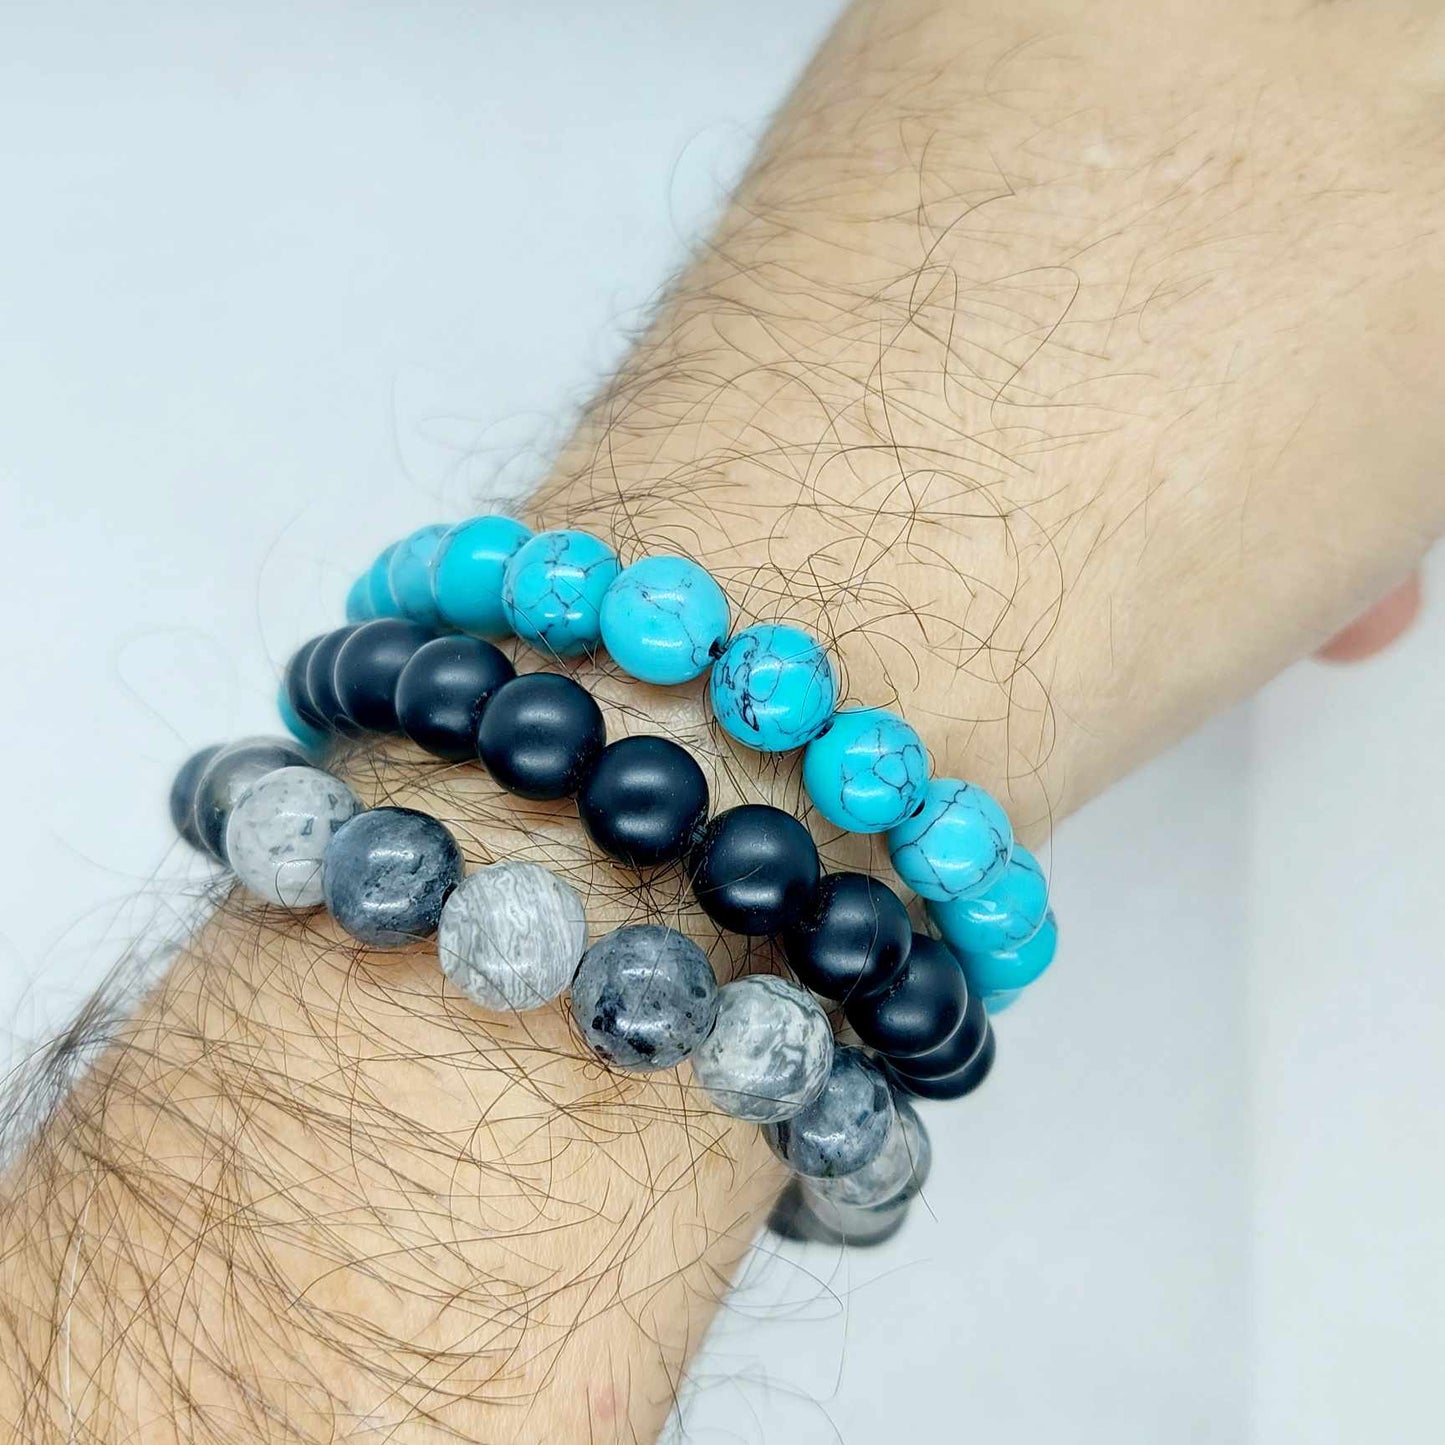 Natural Stone Combo Bracelet with Turquoise, Obsidian and Jasper in 8mm stones